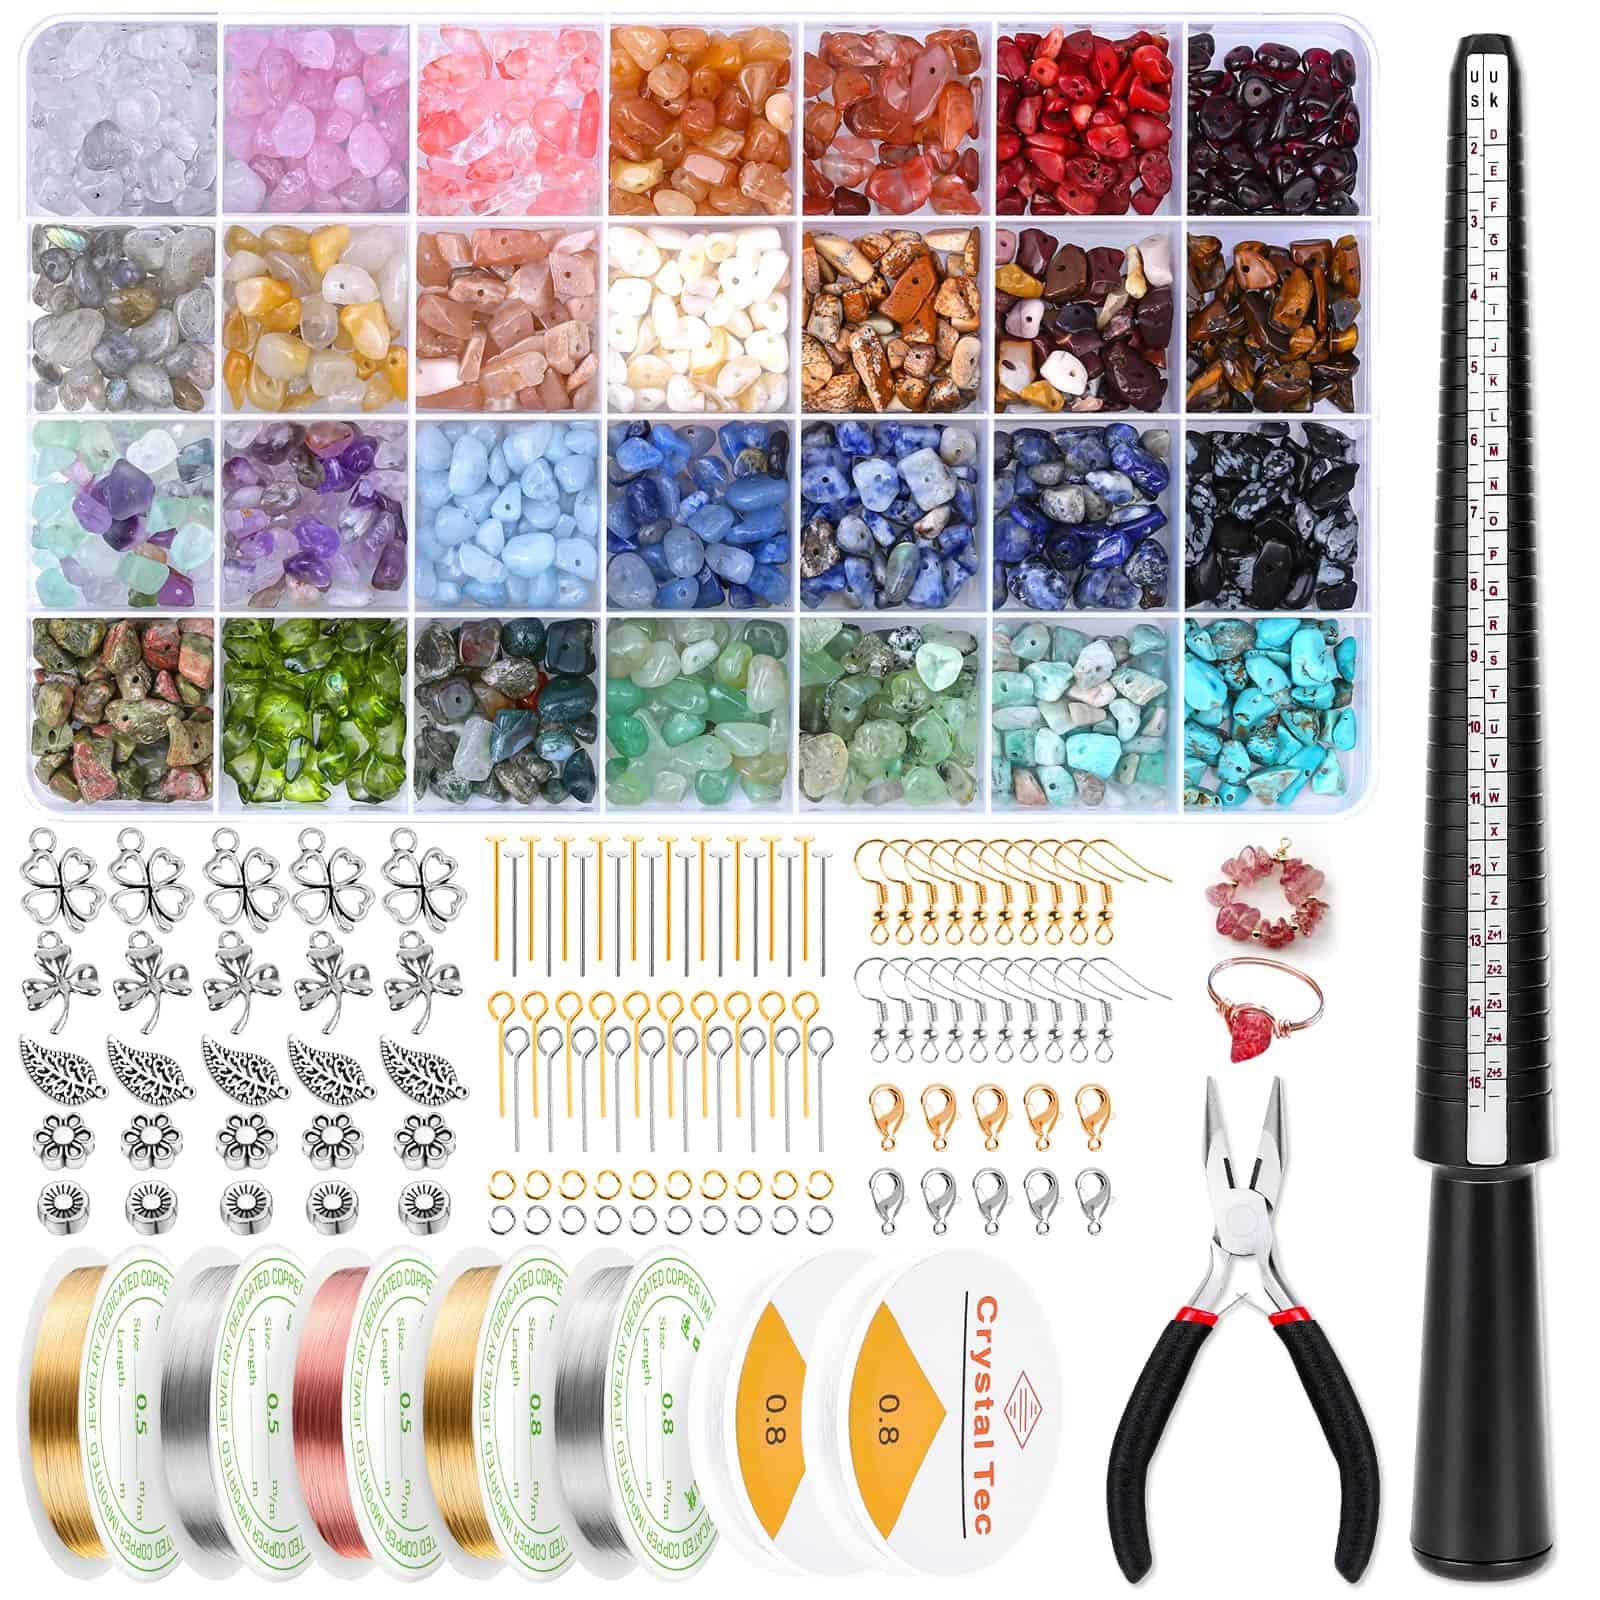 selizo Ring Making Kit with Crystal Beads 28 Colors Crystal